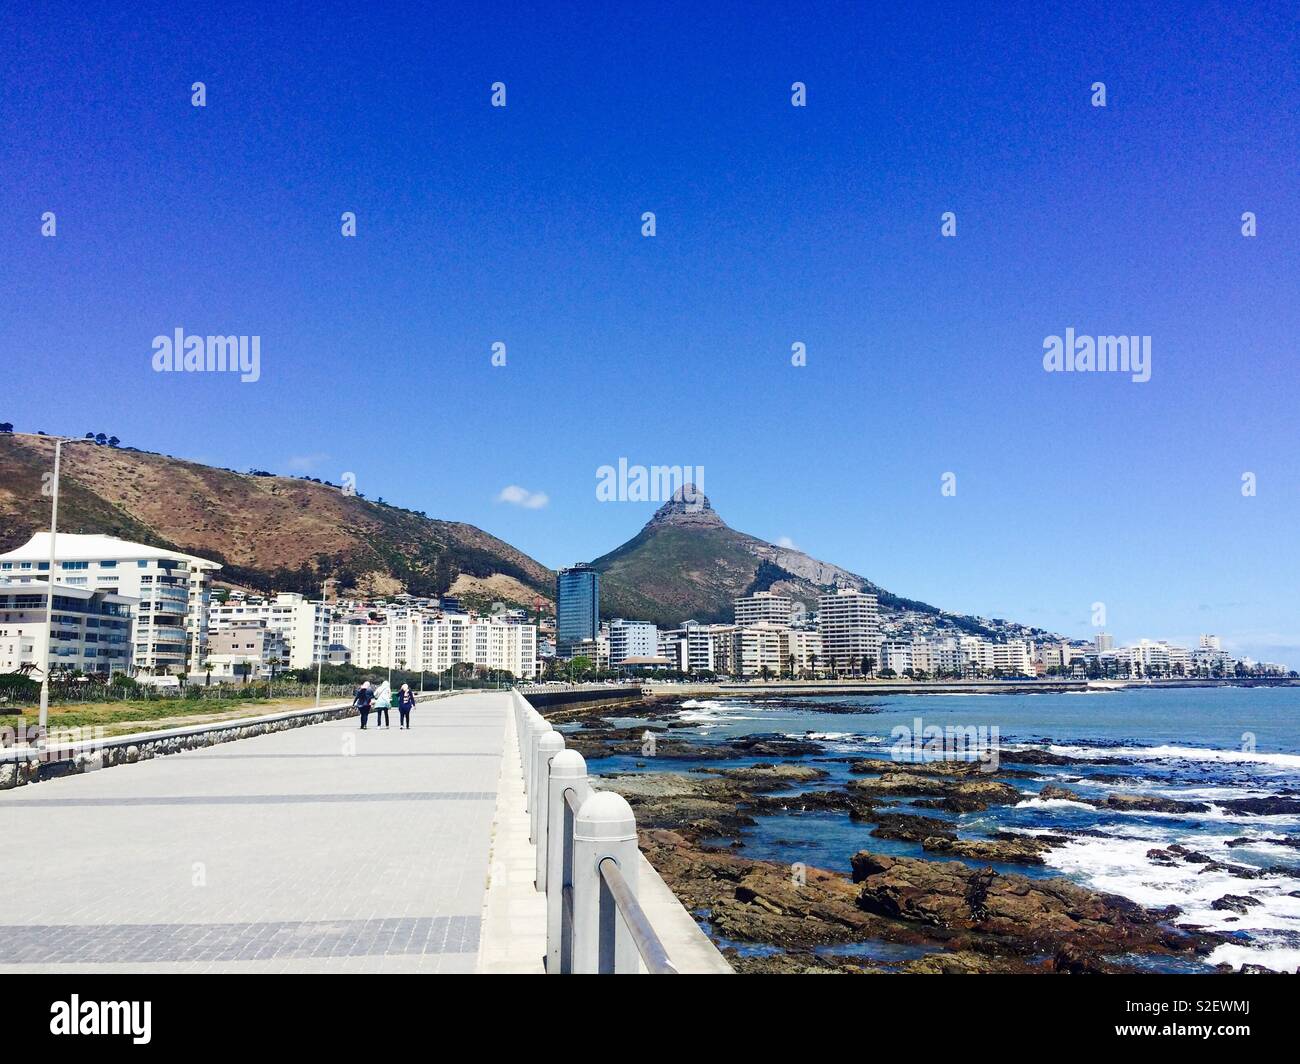 Promenade or walkway along the Atlantic Ocean coastline of Mouille Point looking toward Sea Point and Lion's Head in Cape Town, South Africa on a sunny Summer's day Stock Photo